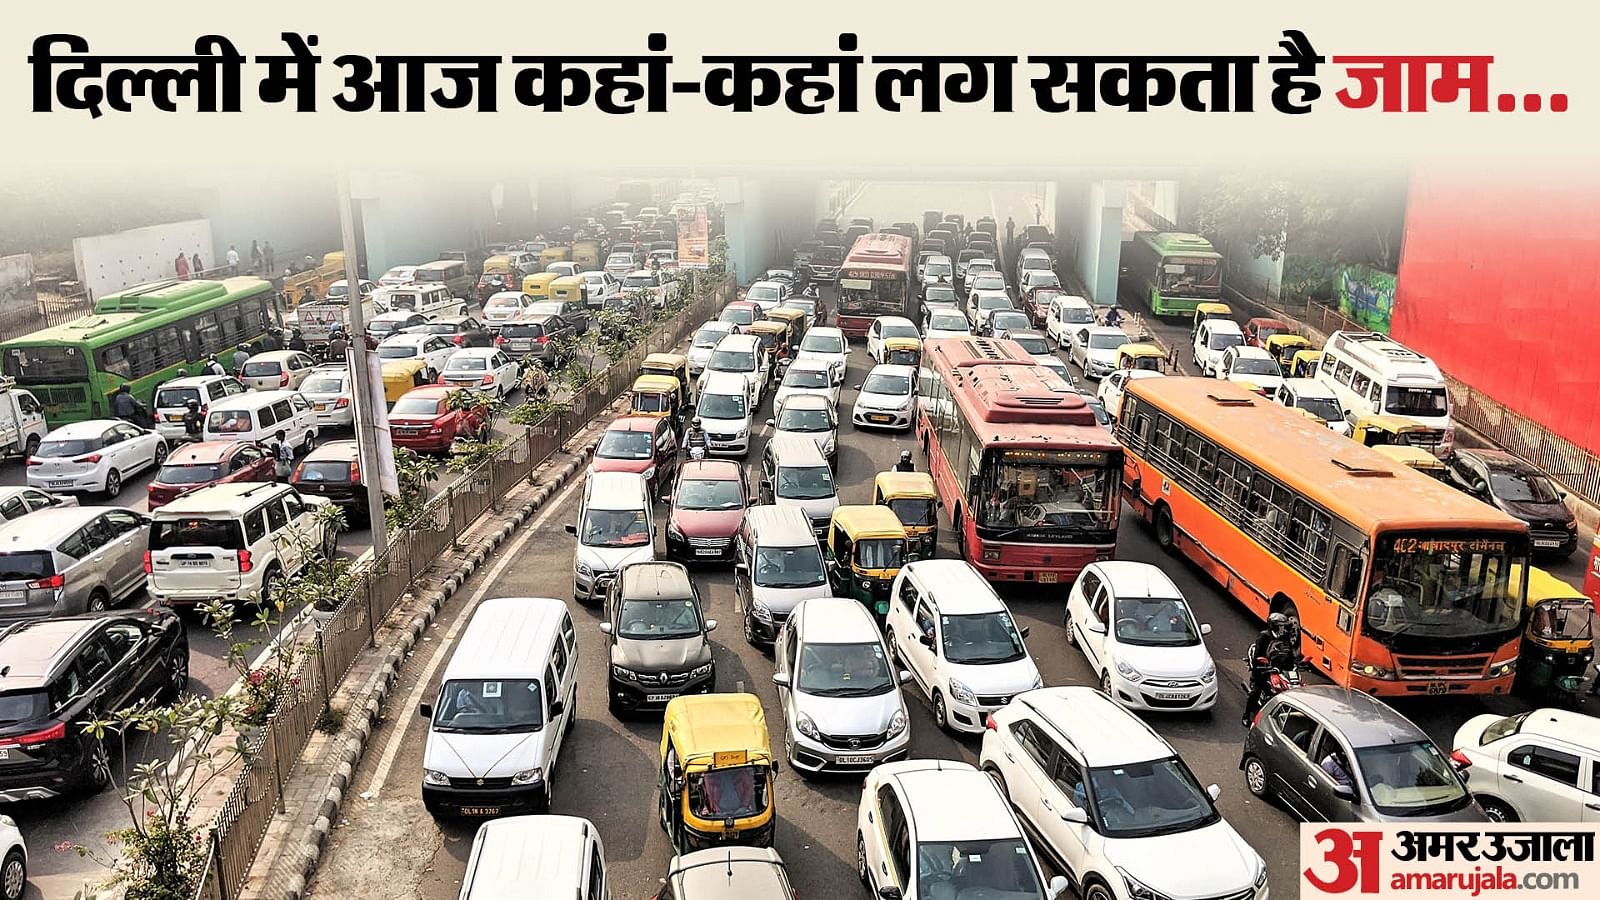 The Delhi Traffic Police has issued instructions to motorists not to go on these routes to avoid traffic jam